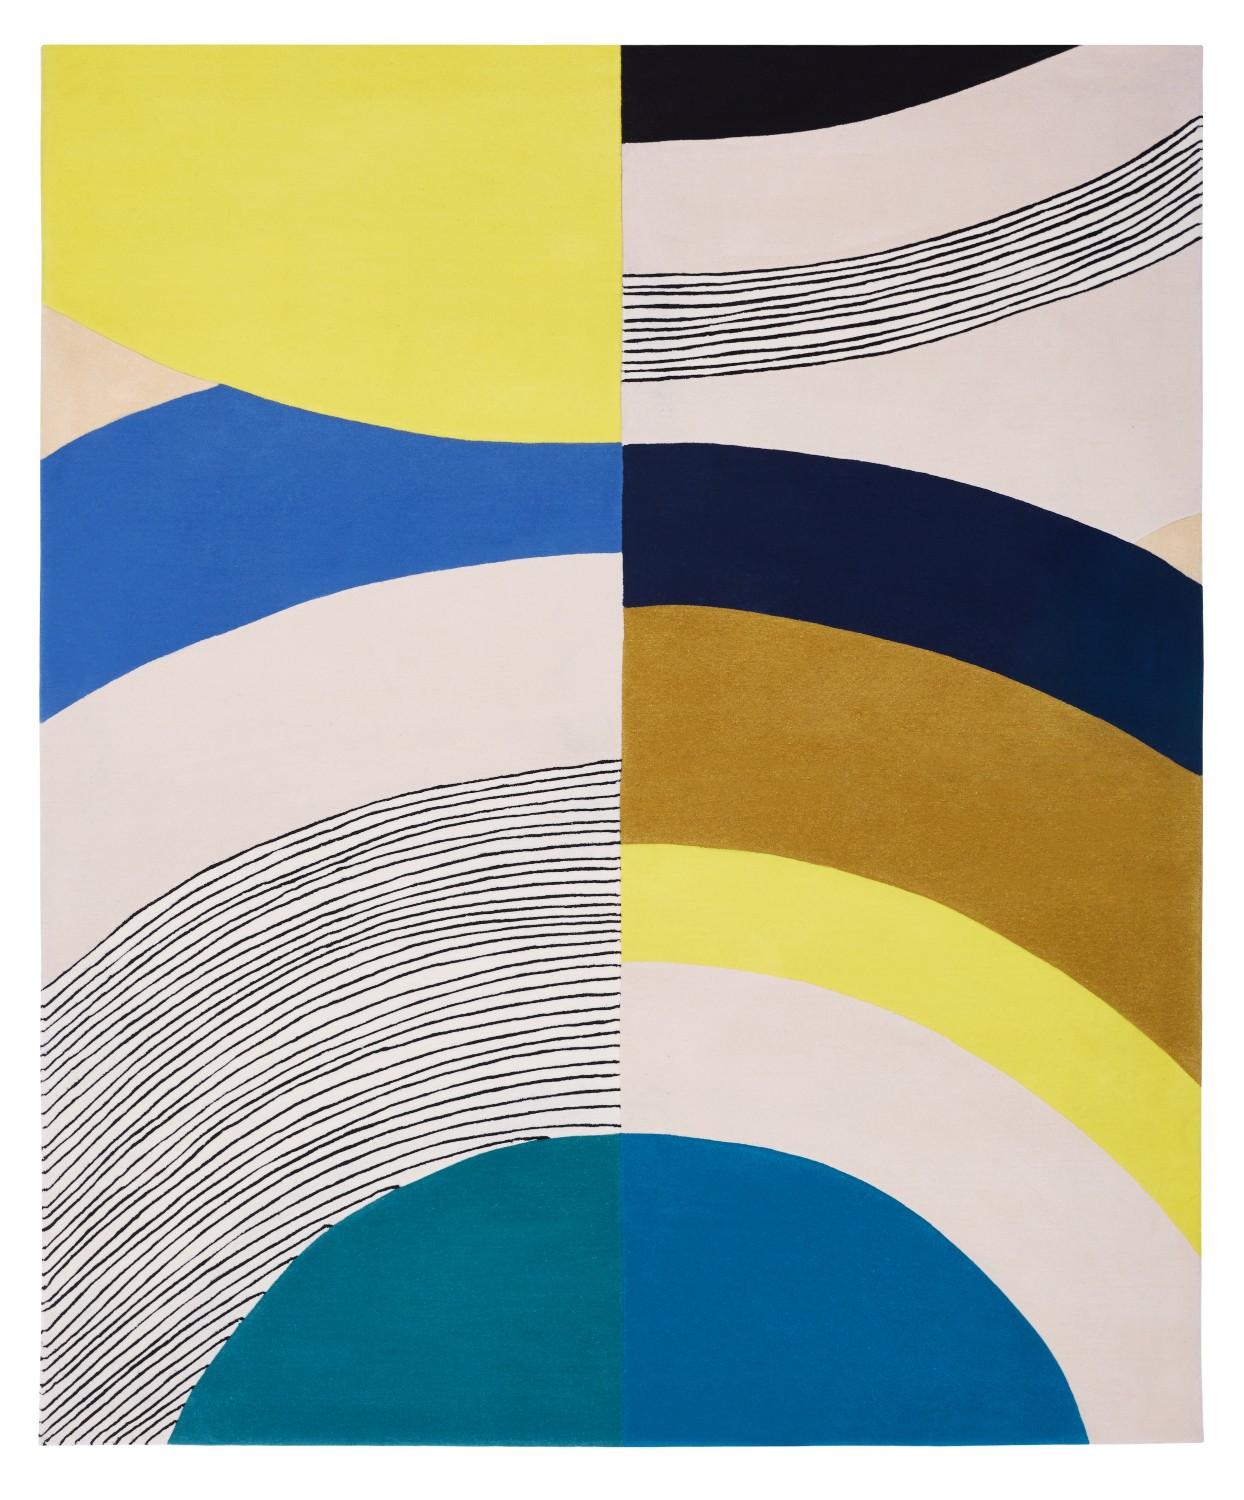 New Zealand Contemporary Colorful Rug Inspired by Seoul's Aesthetic For Sale